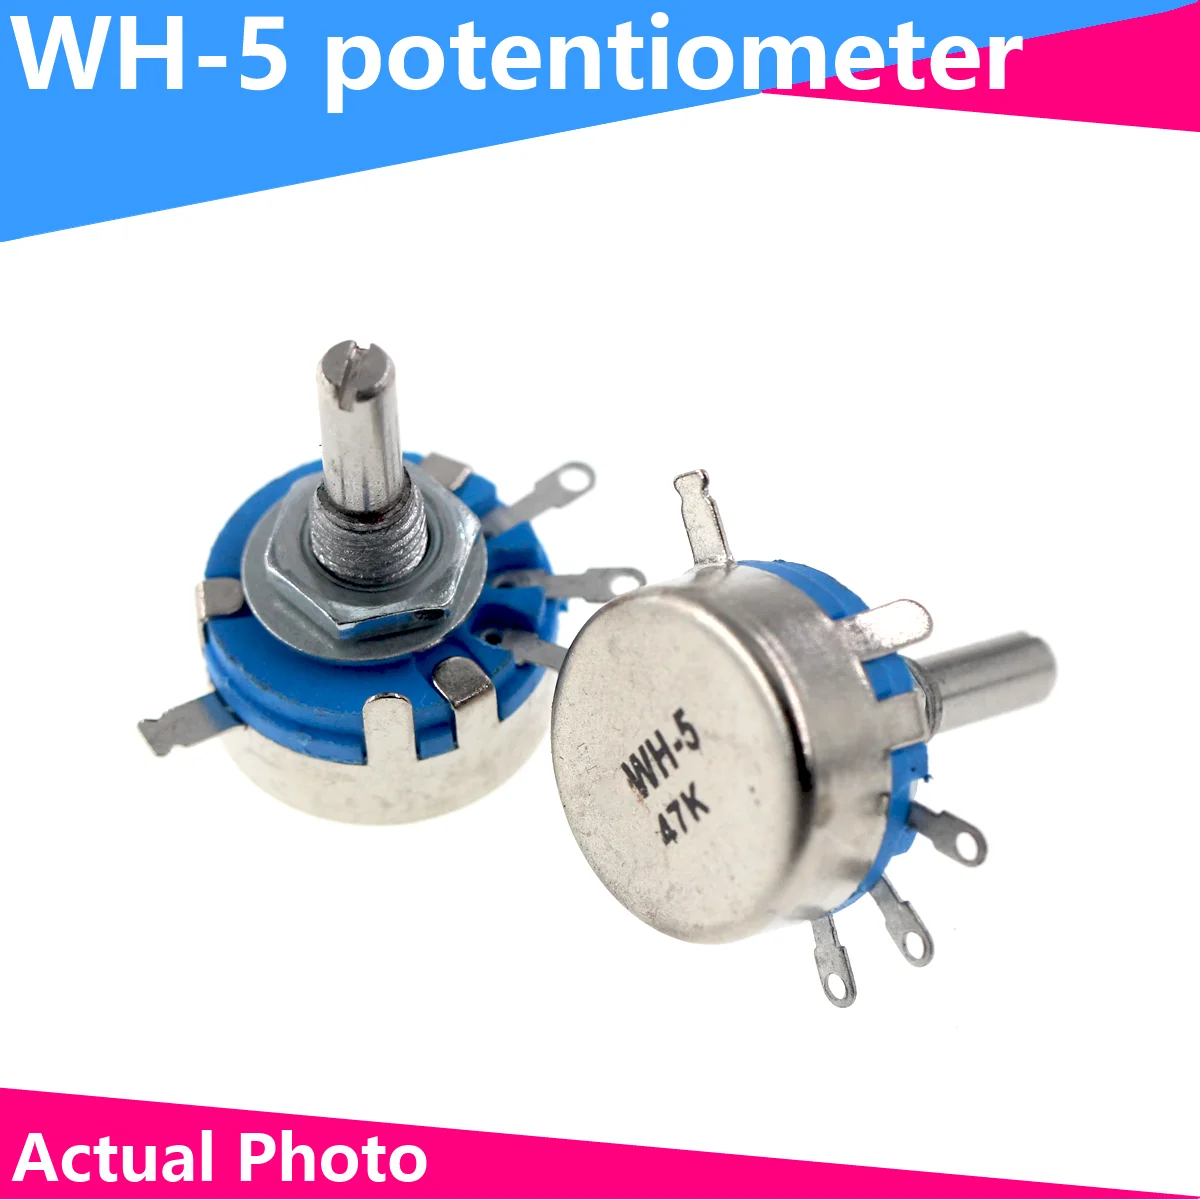 2PCS WH5-1A 470R 1K 10K 47K 4K7 100K 470K 220K 1K5 22K 1M ohm 3-Terminals Round Shaft Rotary Taper Carbon Potentiometer WH5 2pcs wh5 1a 470r 1k 10k 47k 4k7 100k 470k 220k 1k5 22k 1m ohm 3 terminals round shaft rotary taper carbon potentiometer wh5